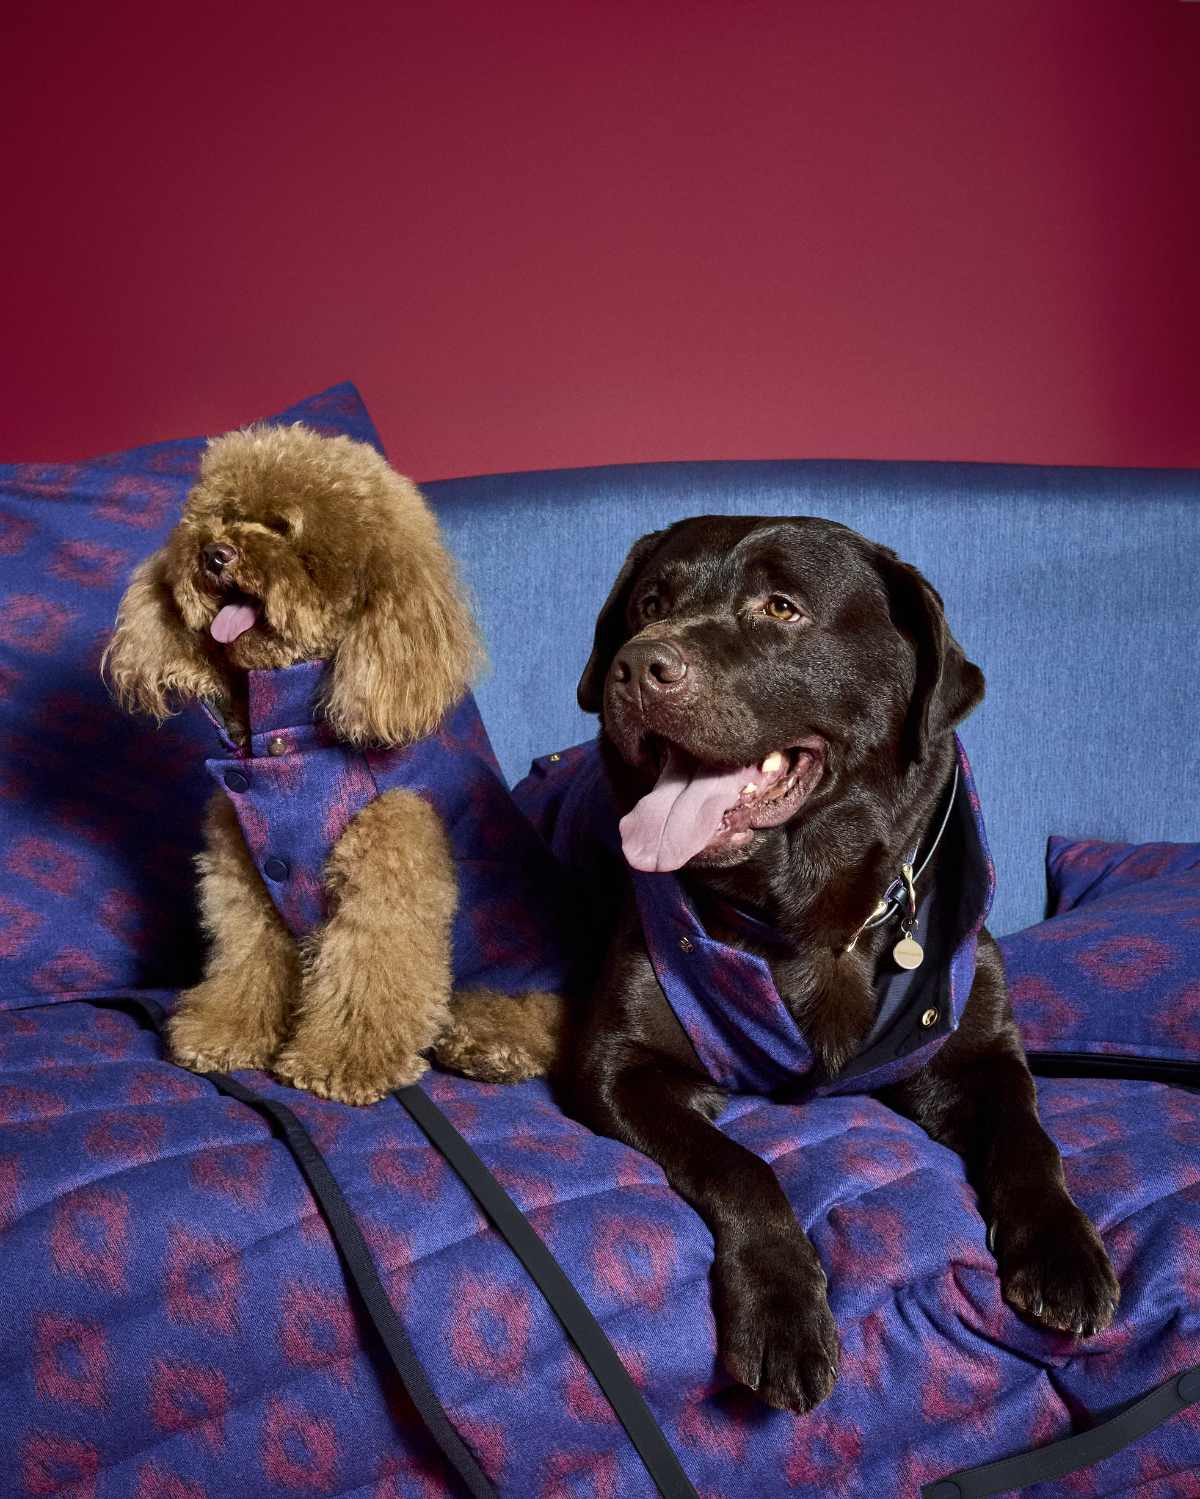 Giorgio Armani X Poldo Dog Couture: New Collection Of Clothing And Accessories For Dogs